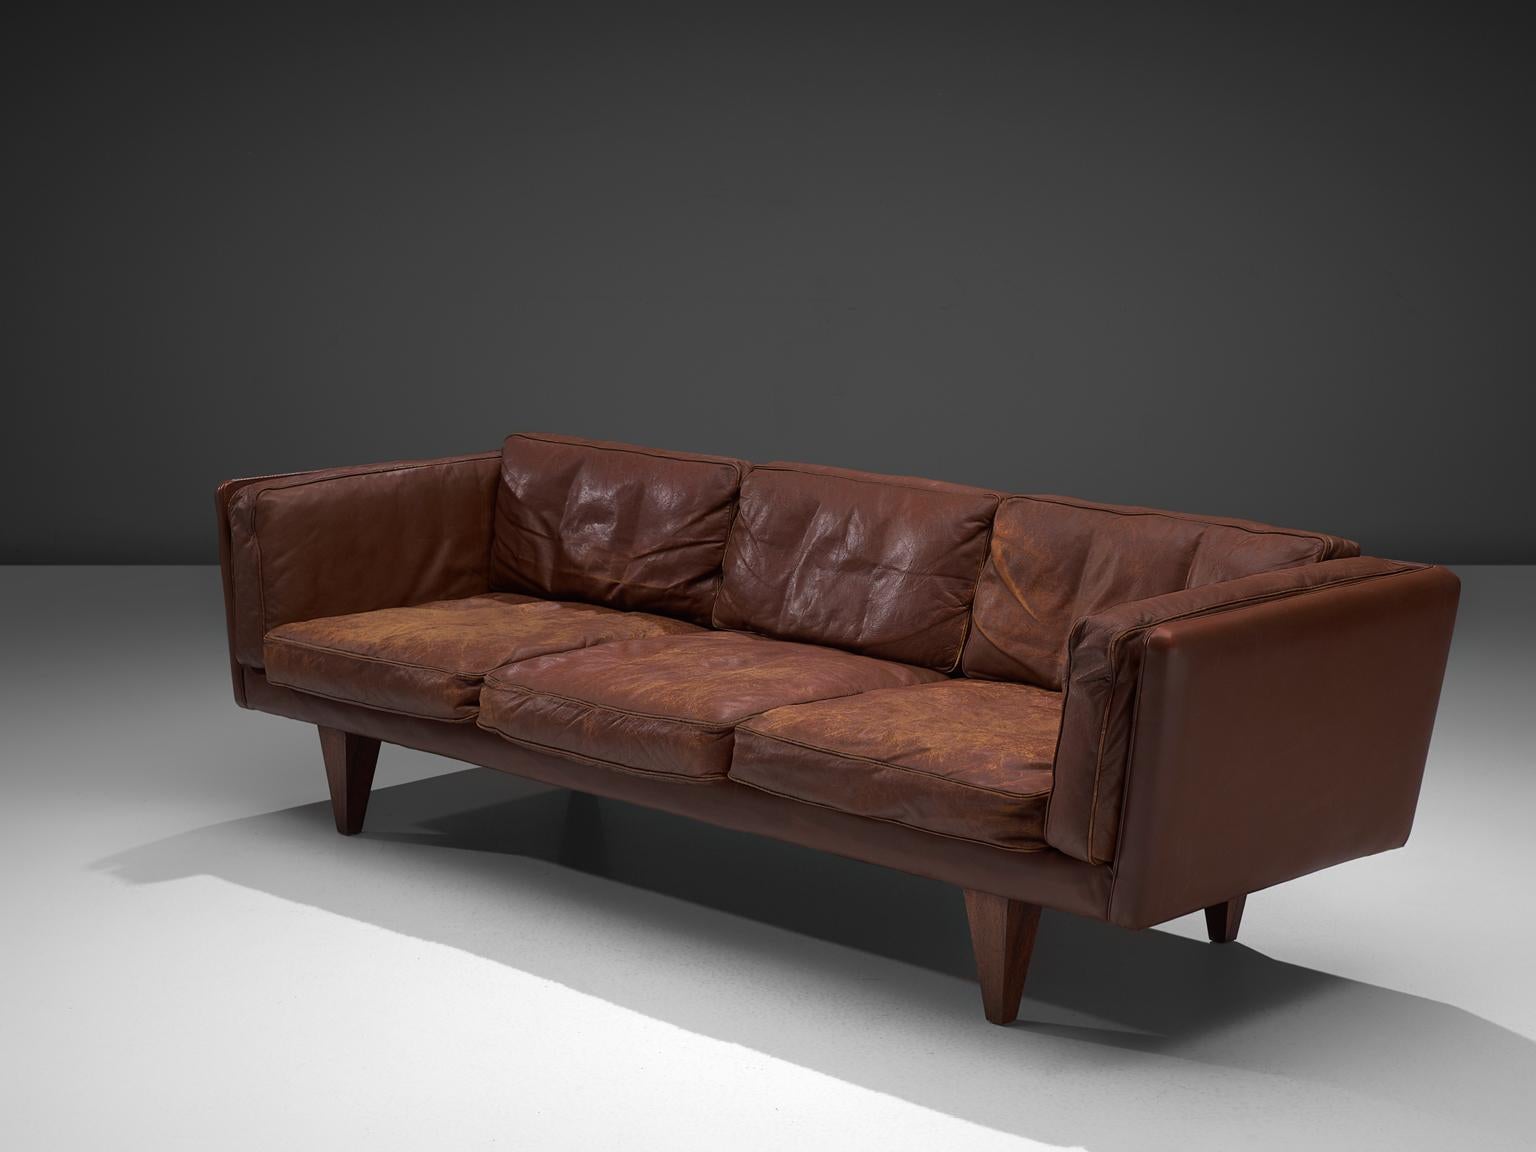 Illum Wikkelsø, sofa model V11, dark cognac leather and wood, Denmark, 1960s.

Stunningly three-seat sofa, designed by Danish designer Illum Wikkelsø. Highly comfortable and beautiful designed sofa with brown leather upholstery. The nonchalant and